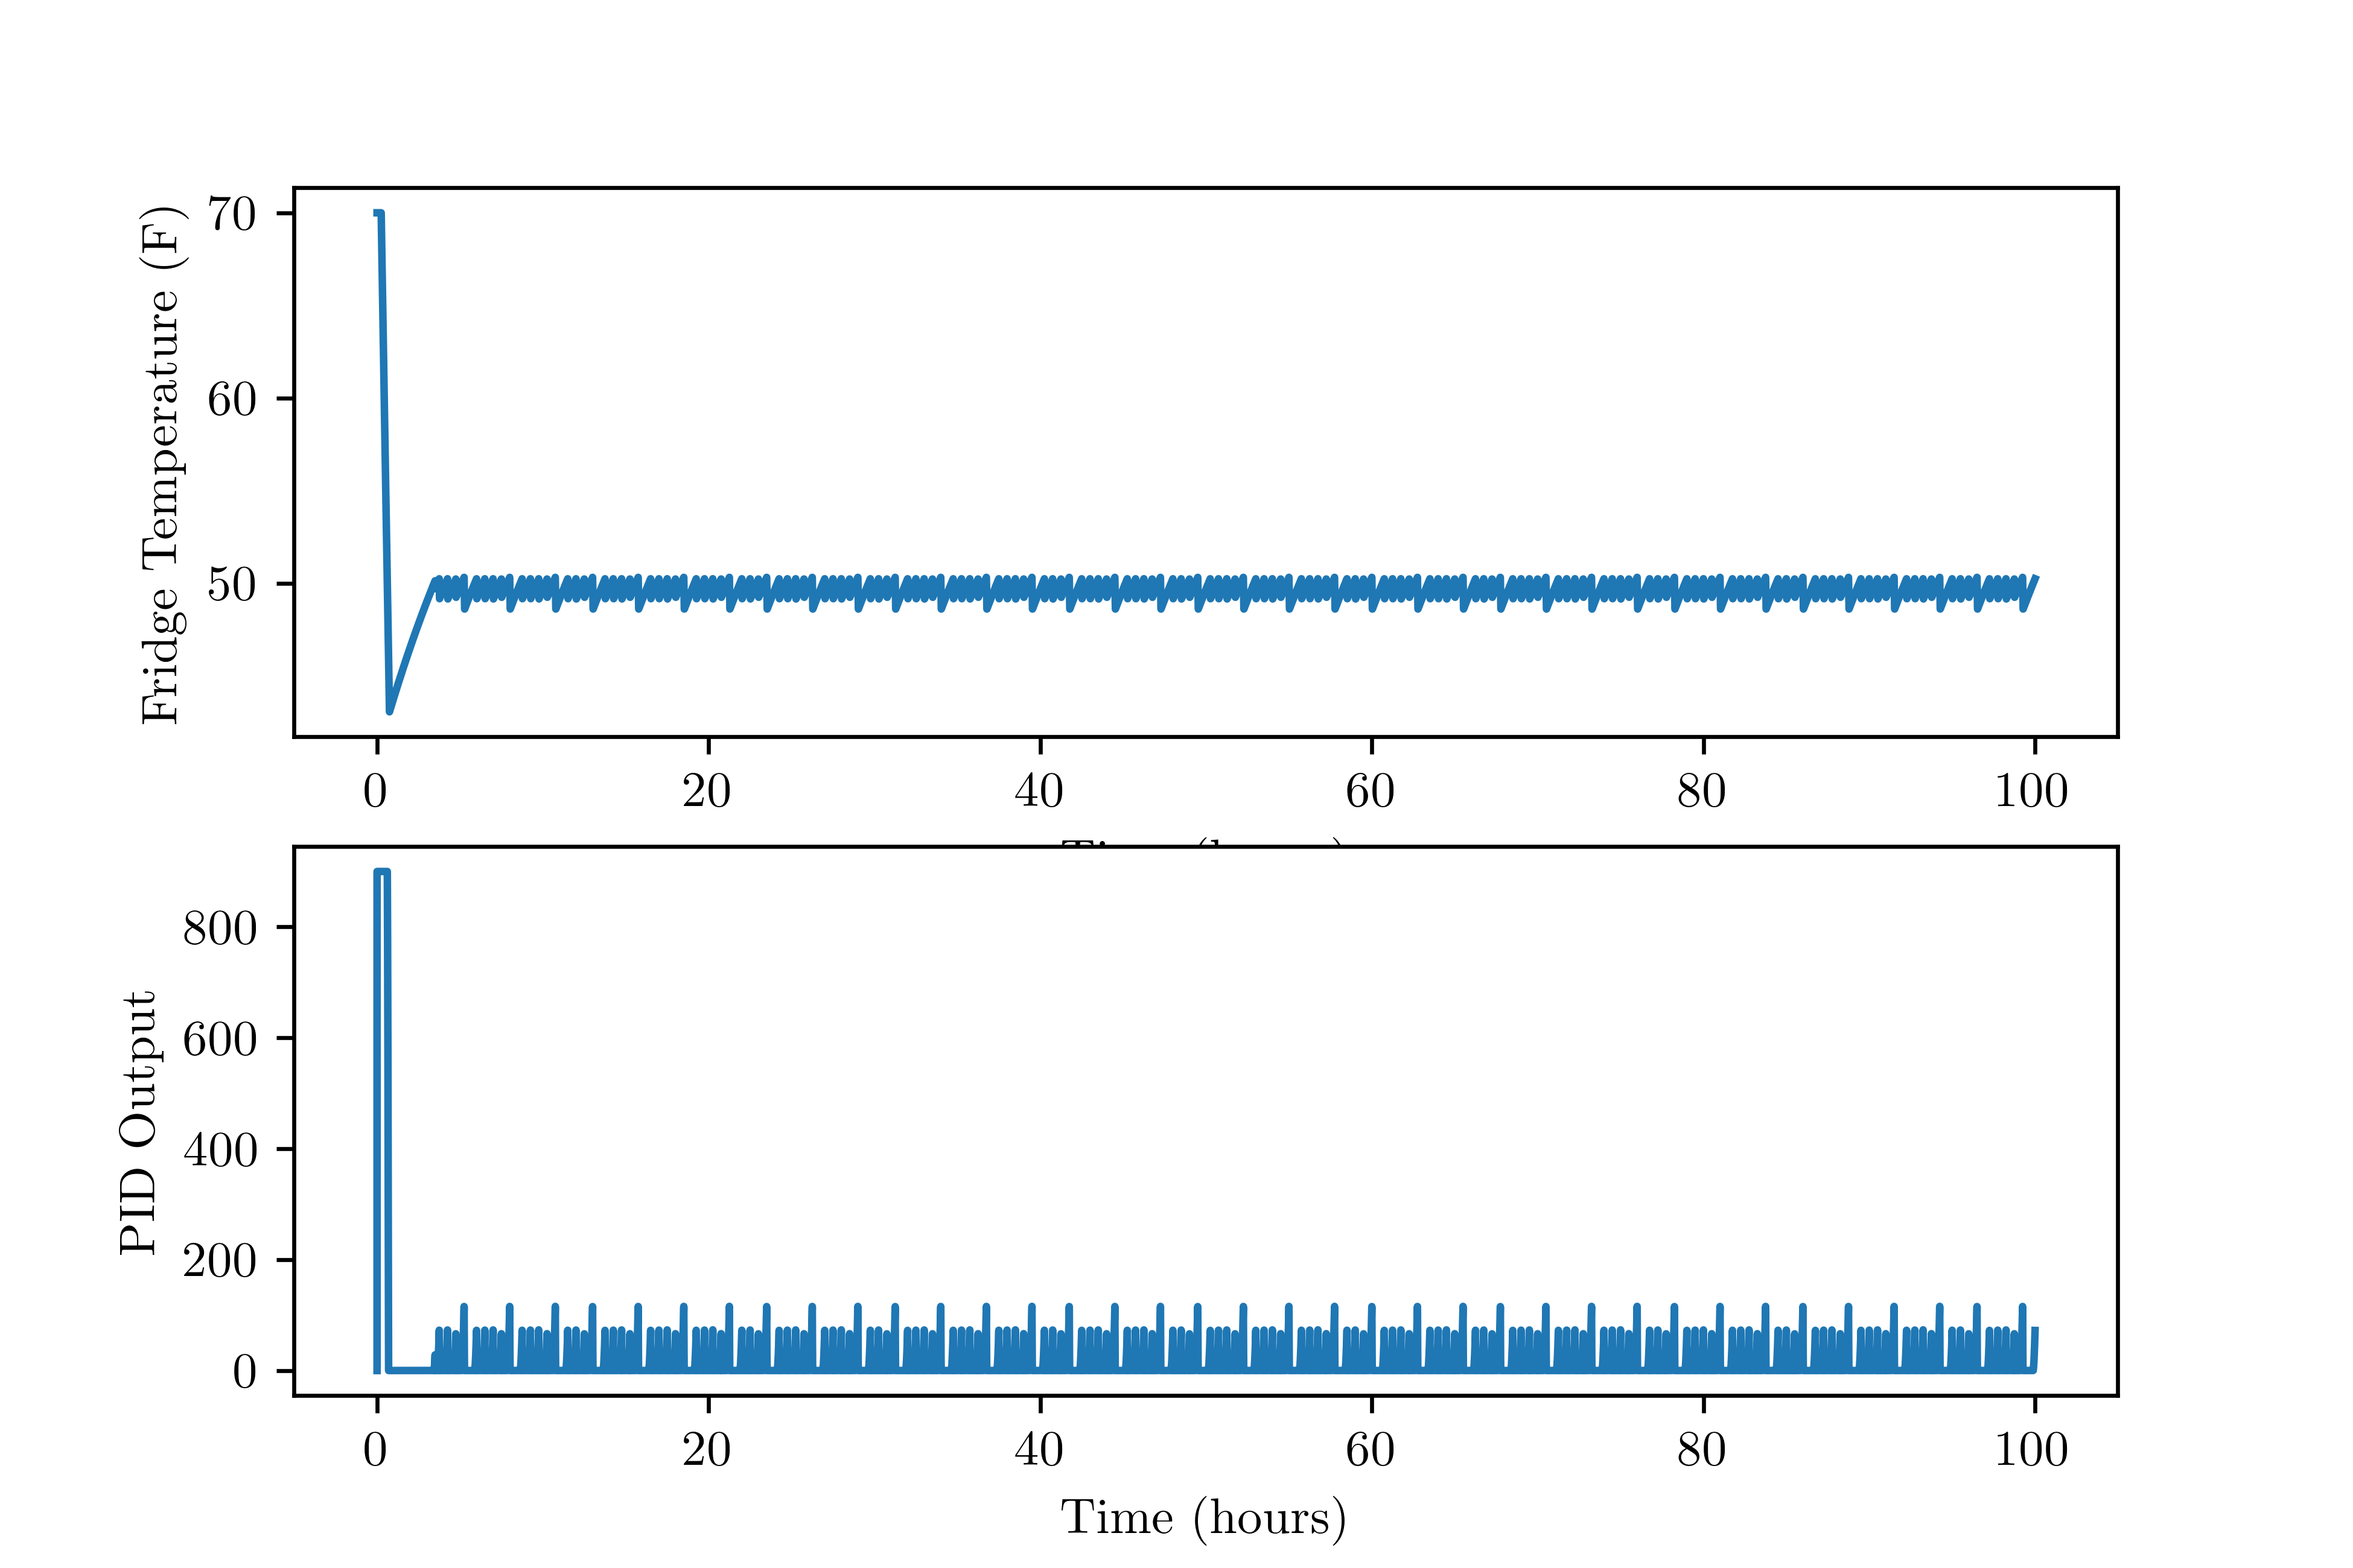 Plot of the simulated temperature and PID output using the initial set of PID parameters.